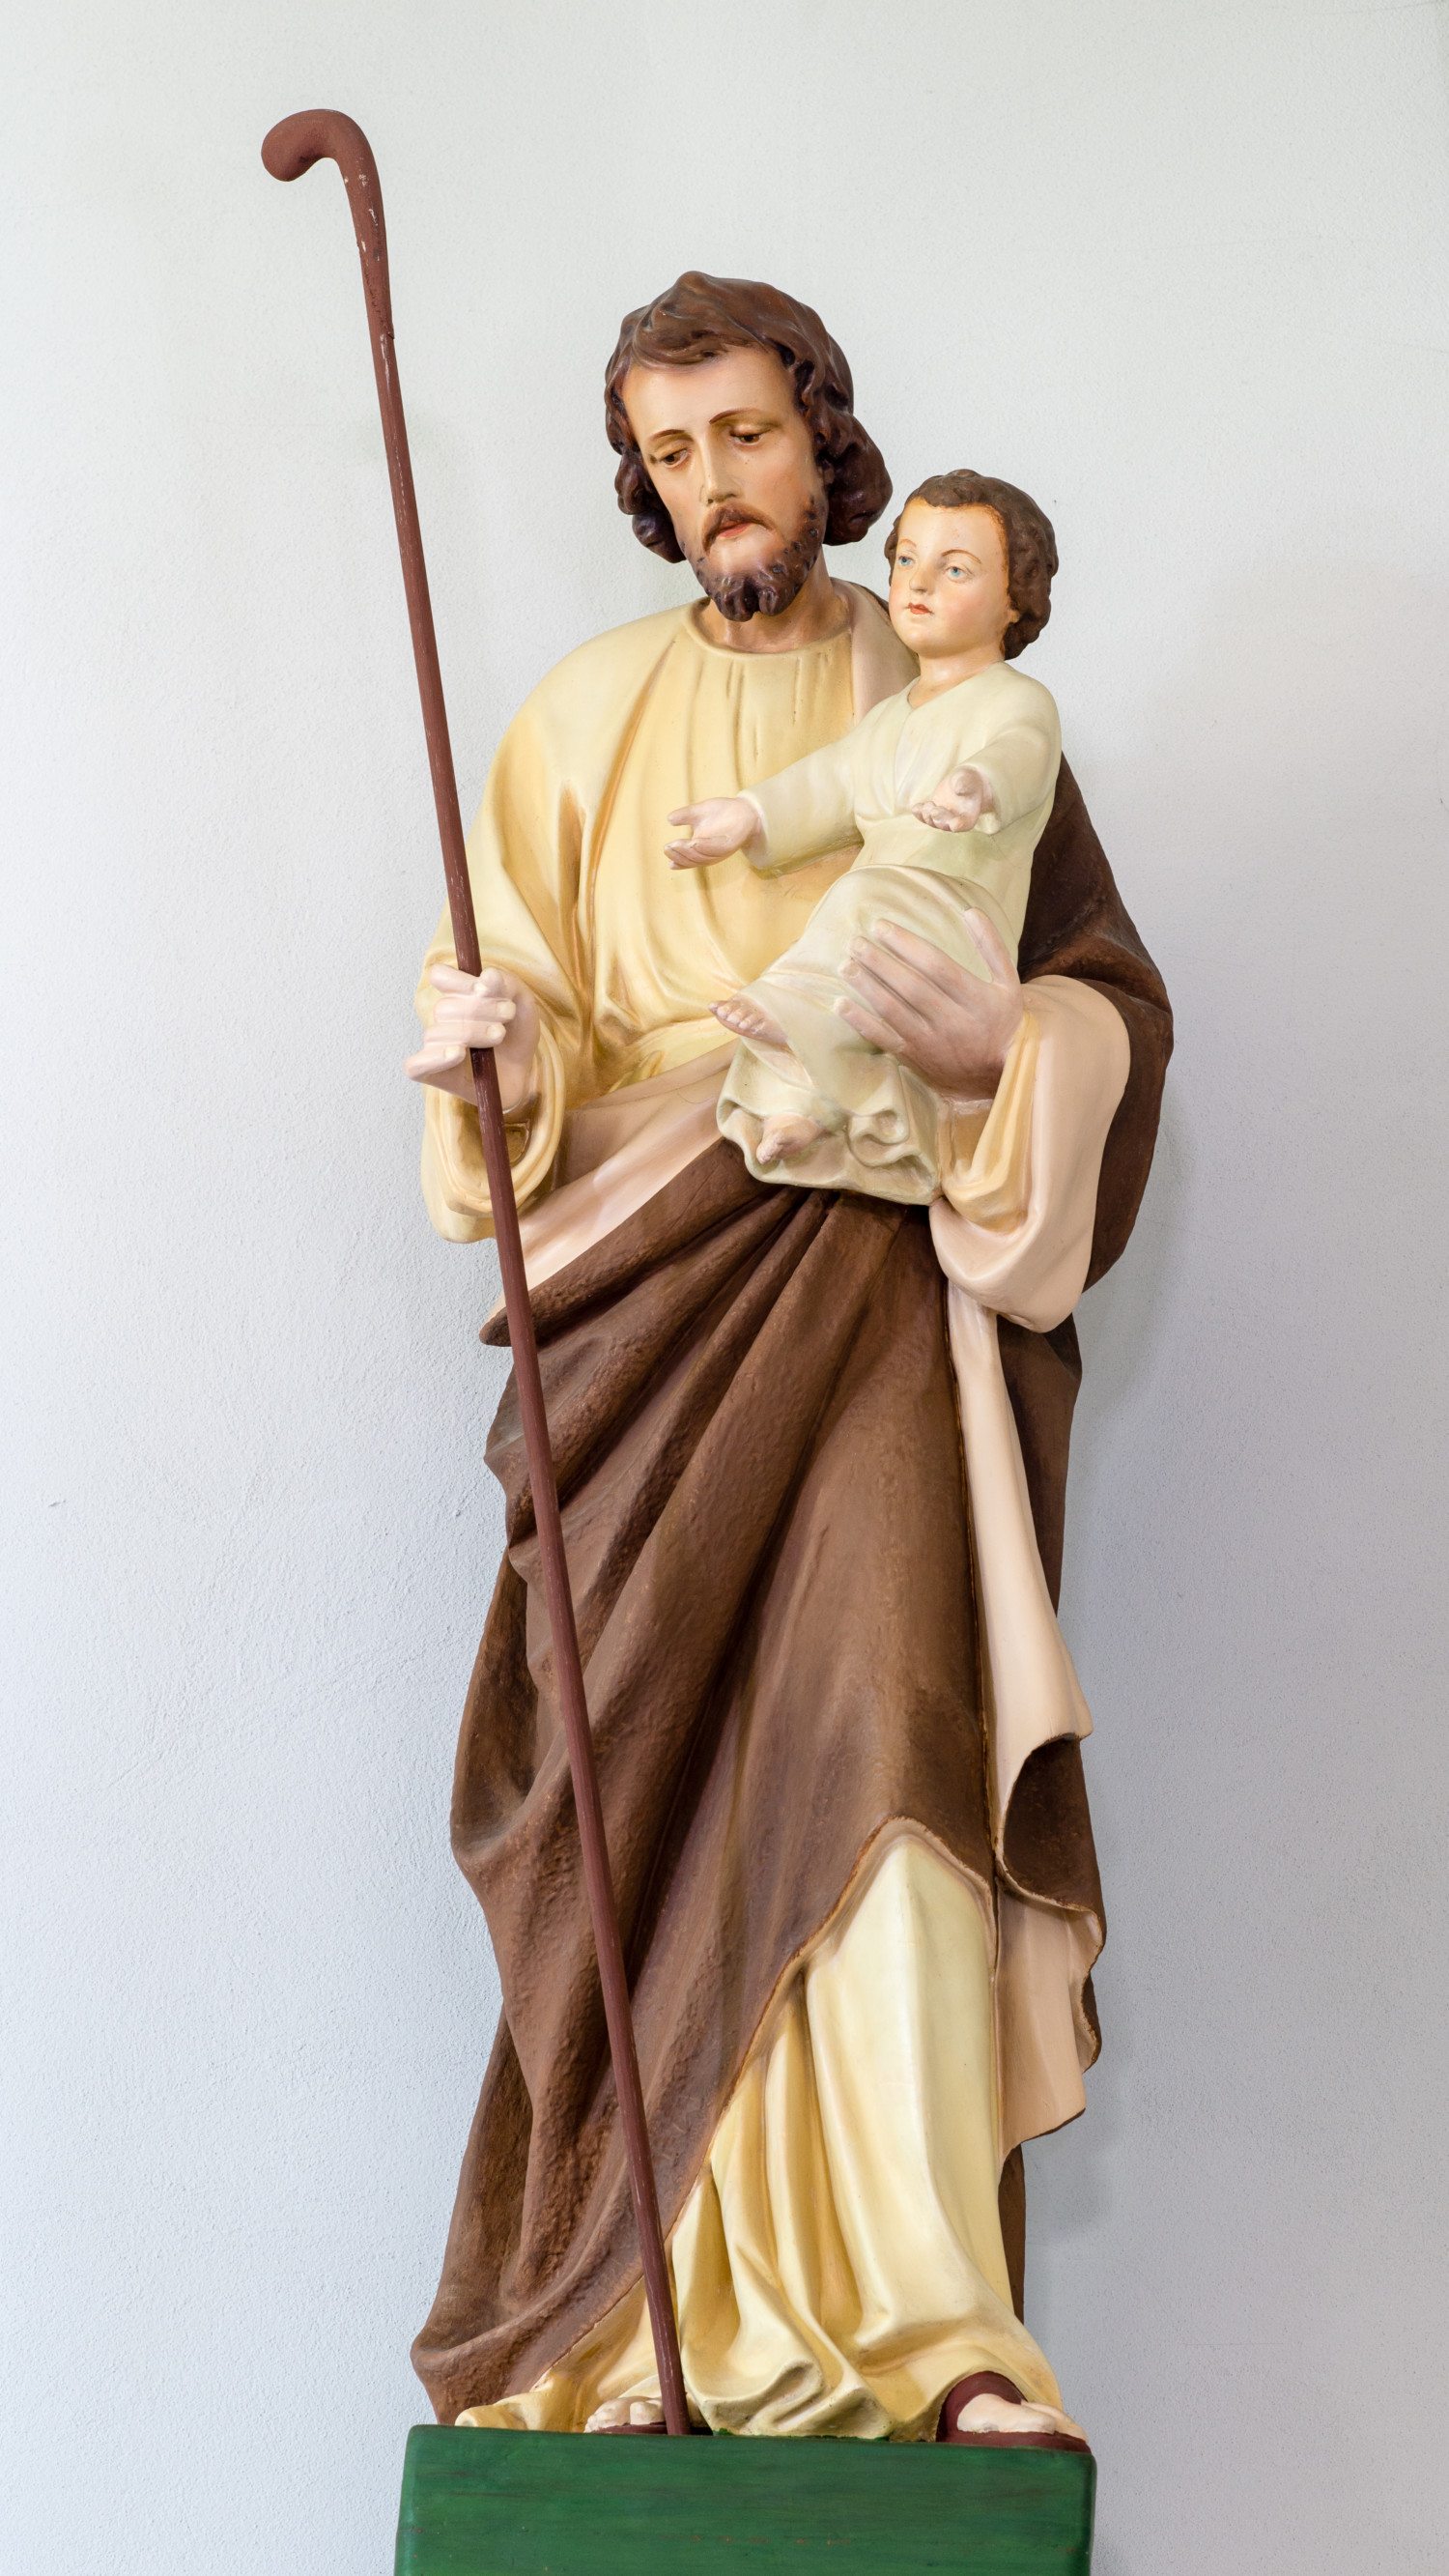 Why Do People Bury St. Joseph Statues In Their Yard? - Simplemost